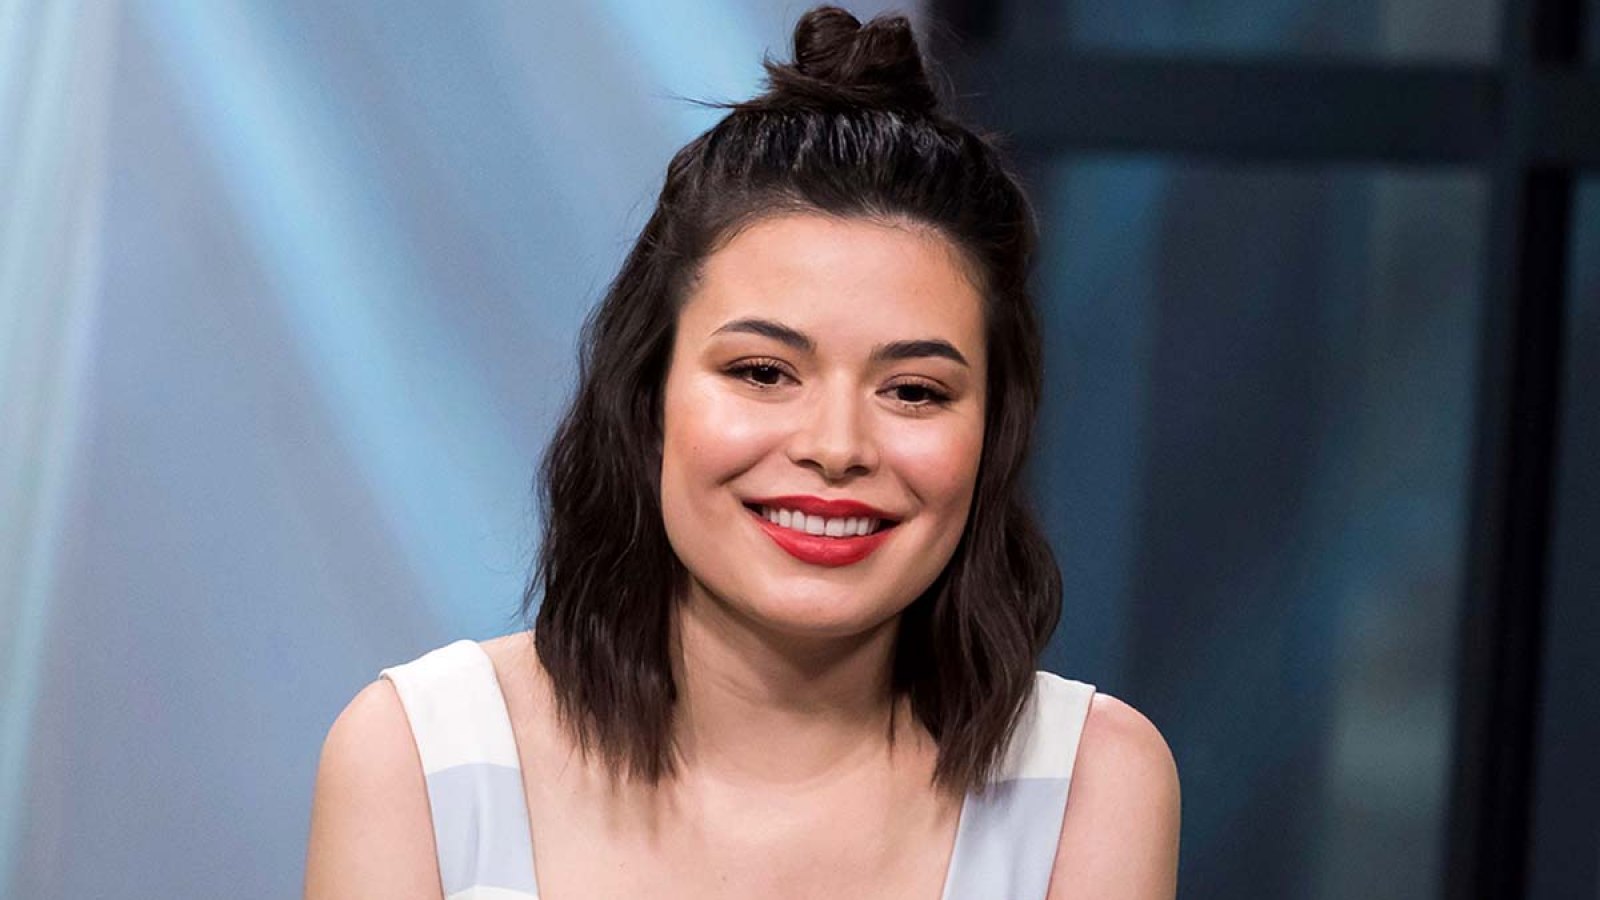 Miranda Cosgrove 25 Things You Don’t Know About Me!